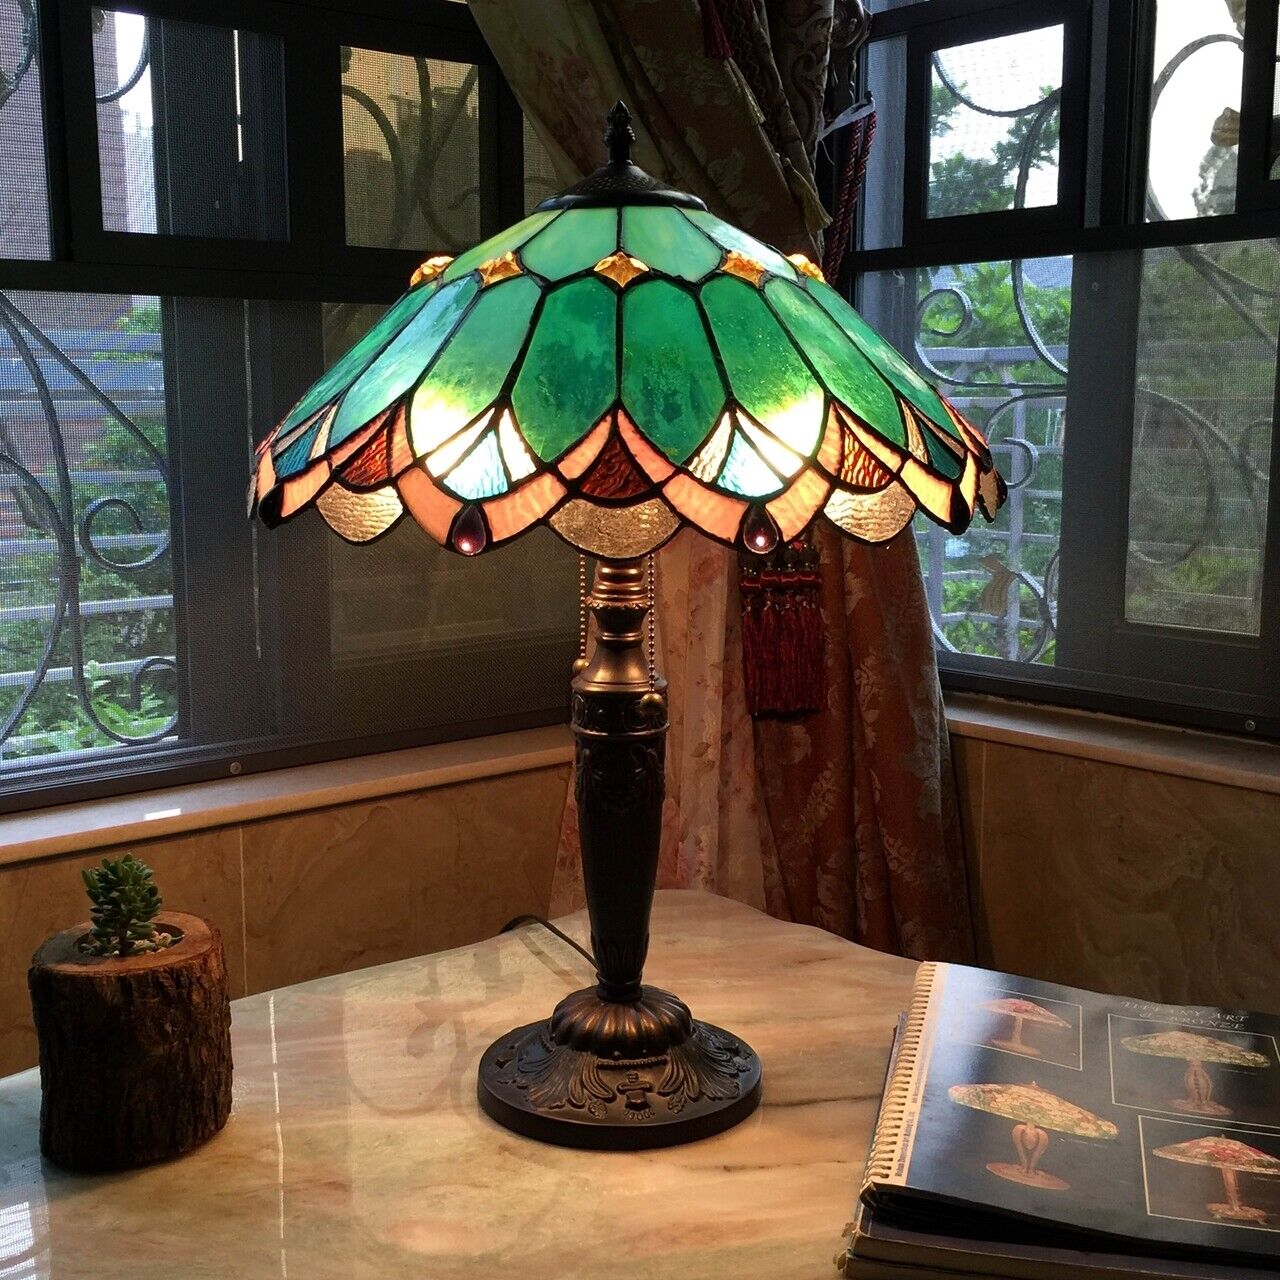 21" Stained Glass Table Lamp